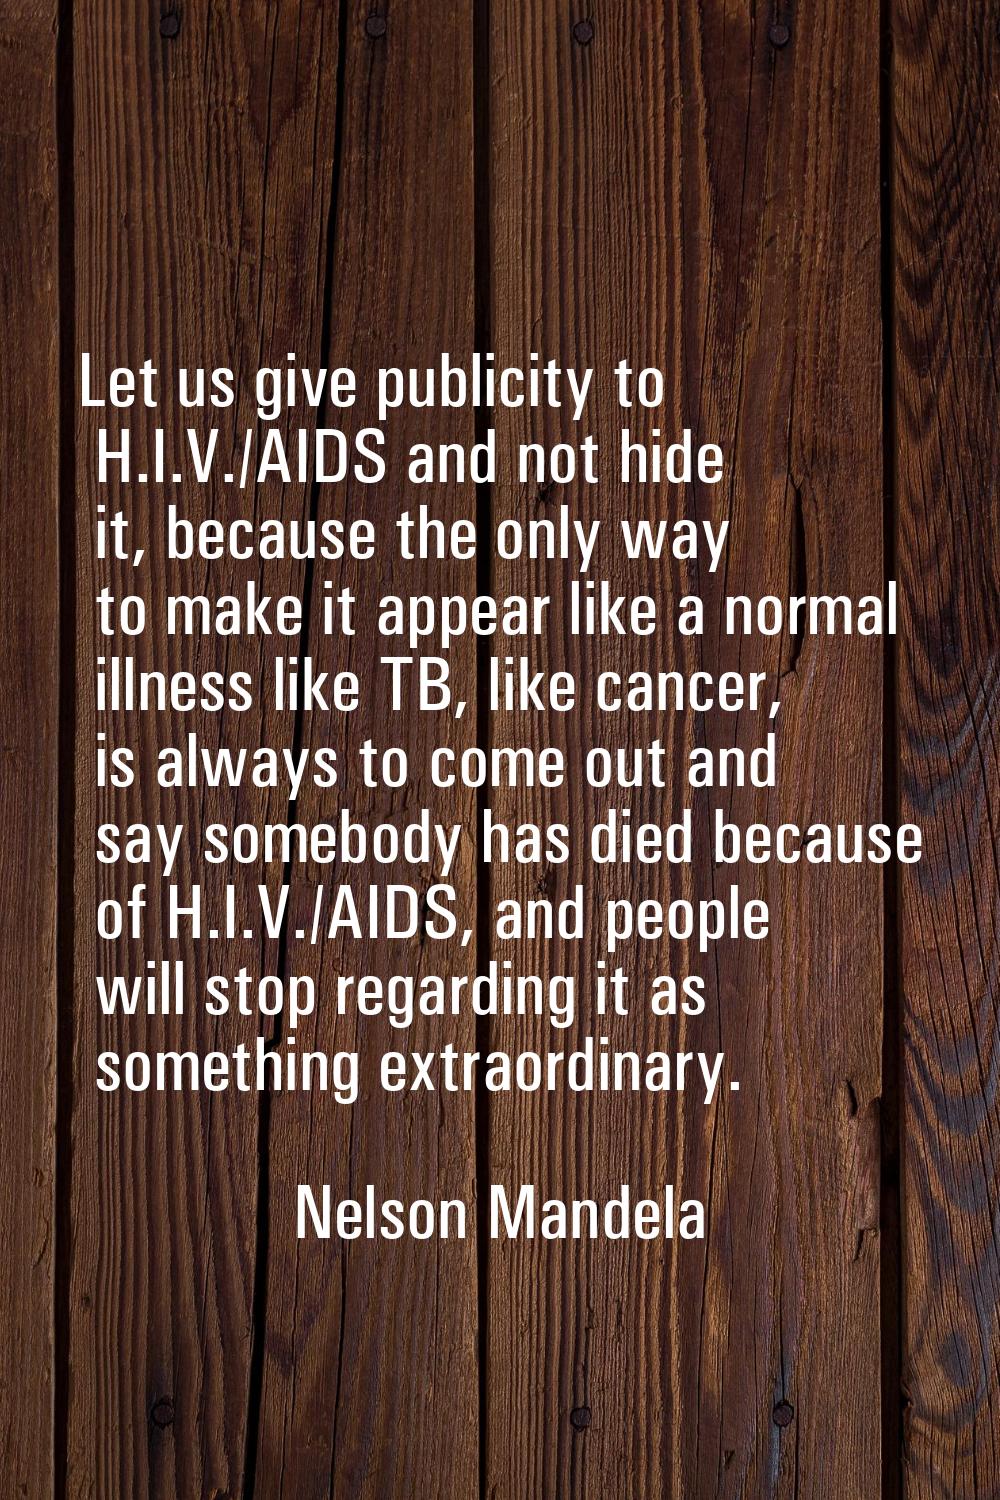 Let us give publicity to H.I.V./AIDS and not hide it, because the only way to make it appear like a